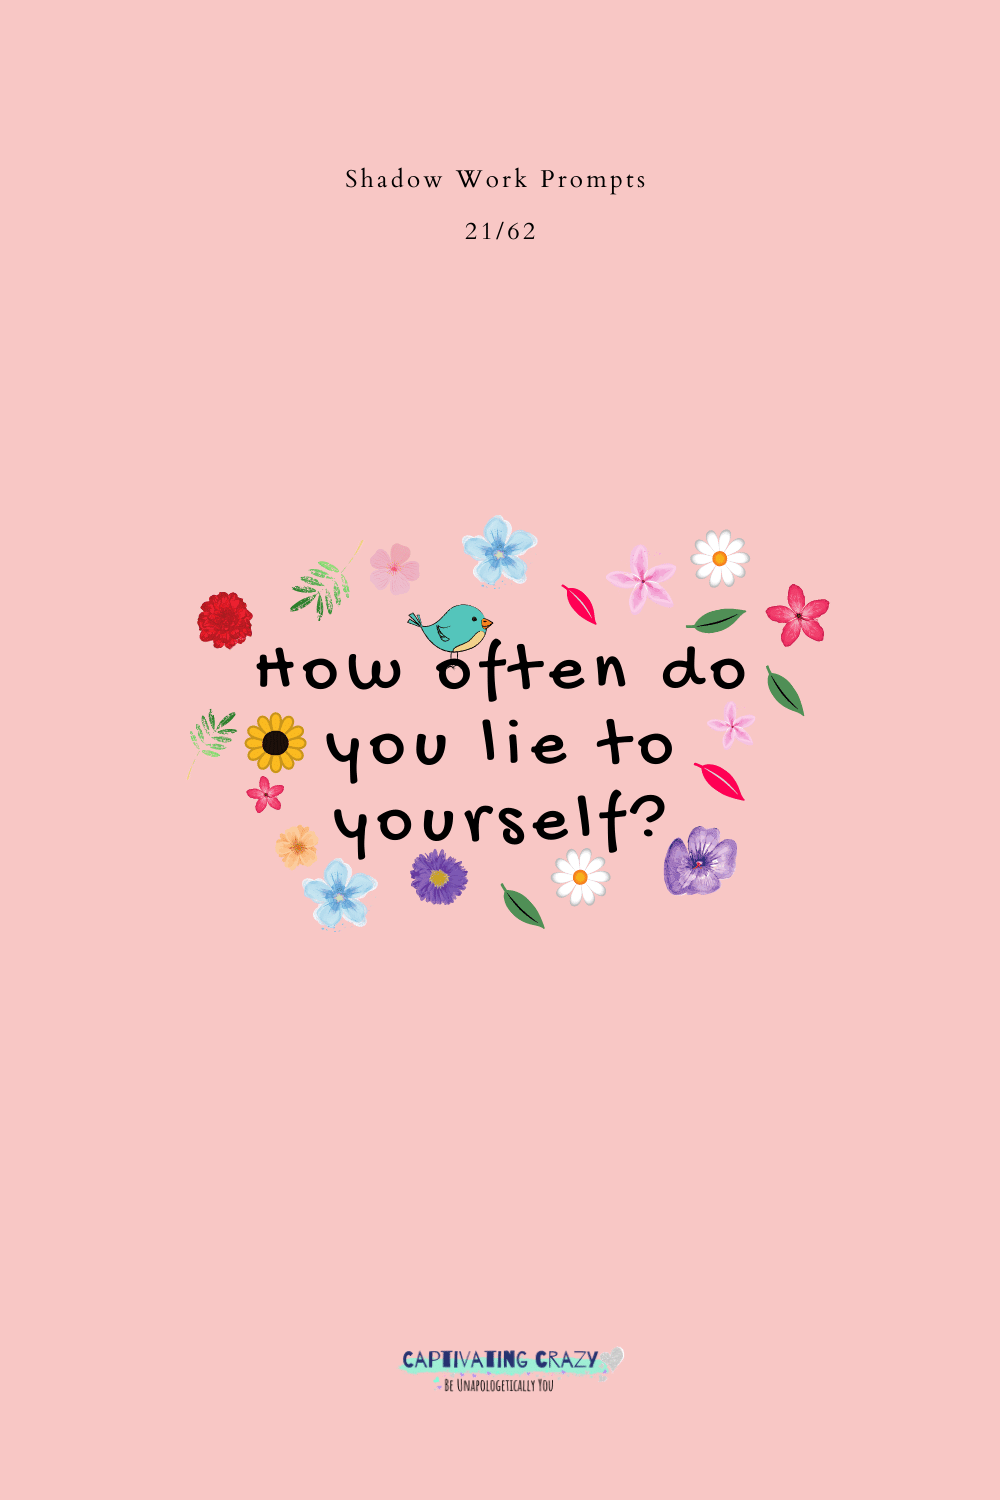 How often do you lie to yourself?